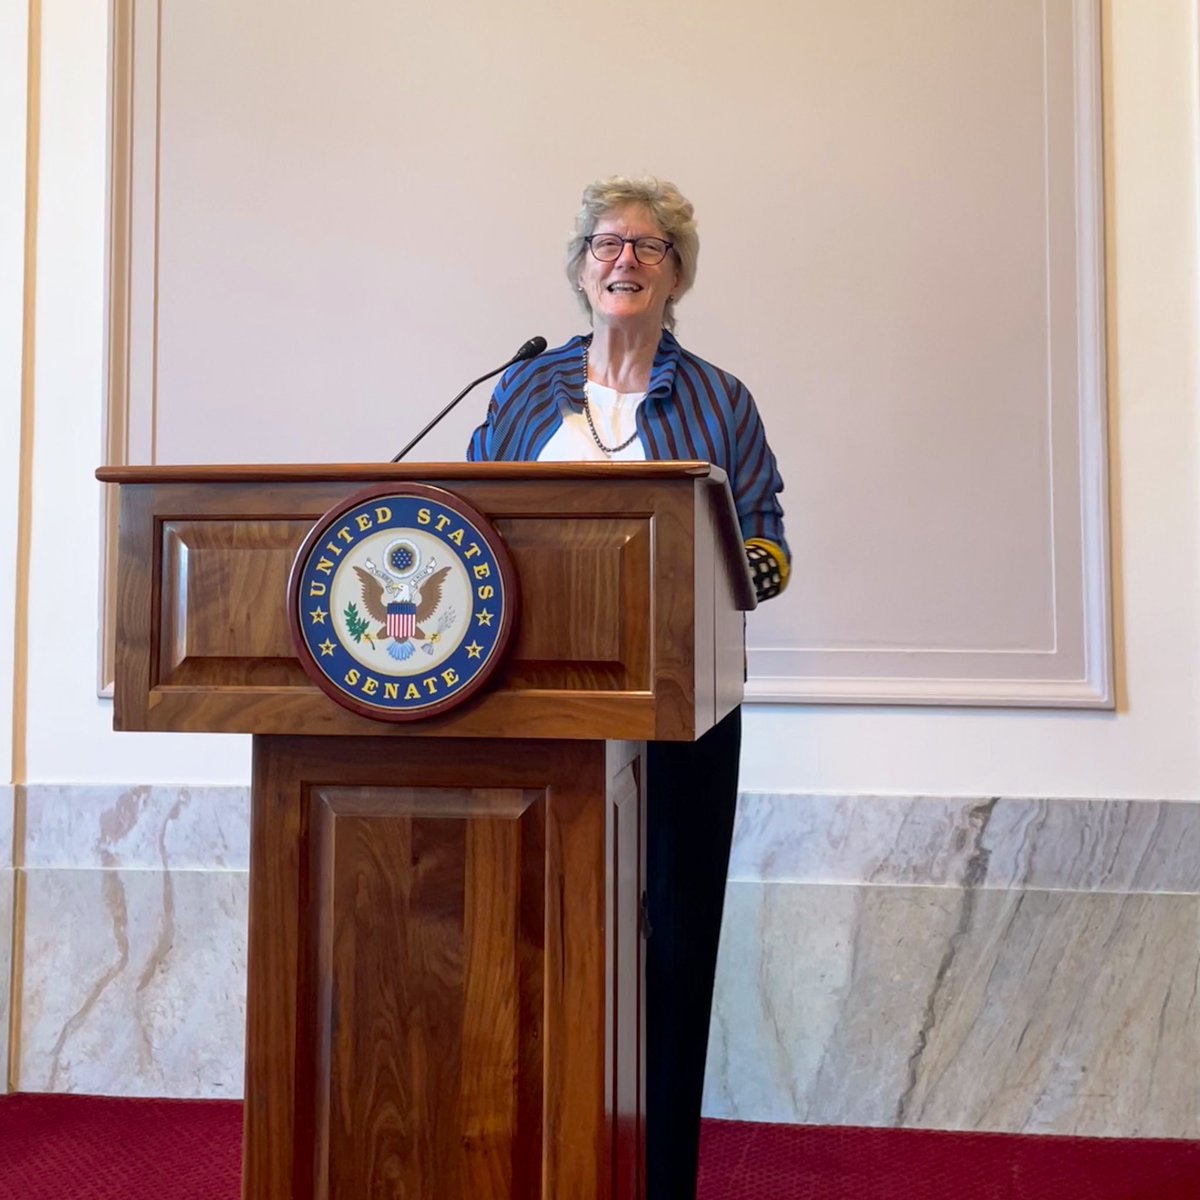 Ensuring that there are life-saving antibiotic treatments needs leadership from policy-makers, healthcare workers, investors and the public. An honour to address US Senate staff members today on the need for antibiotic innovation 💊🇺🇸